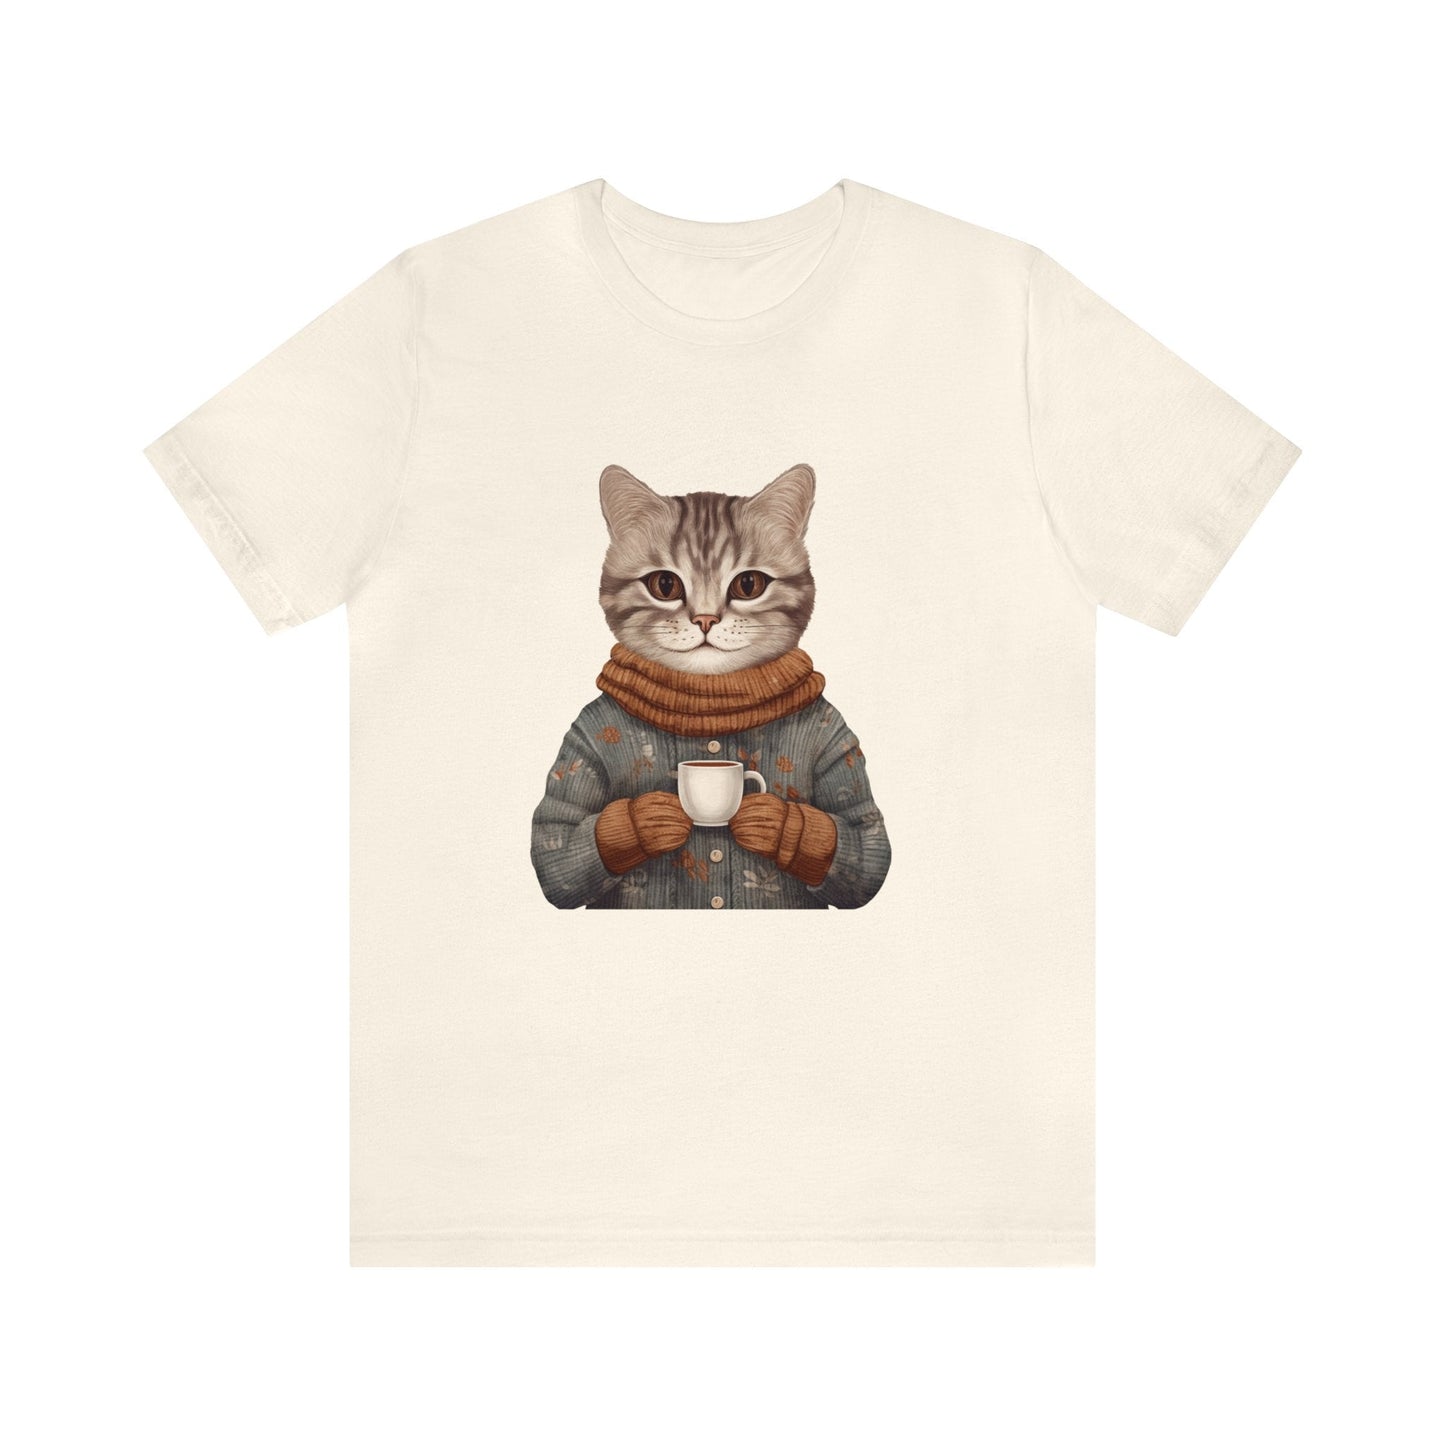 Cute Cat T-Shirt, Artistic Illustration of a Cat in a T-Shirt, Beautiful Astethic Cat Drawing - FlooredByArt